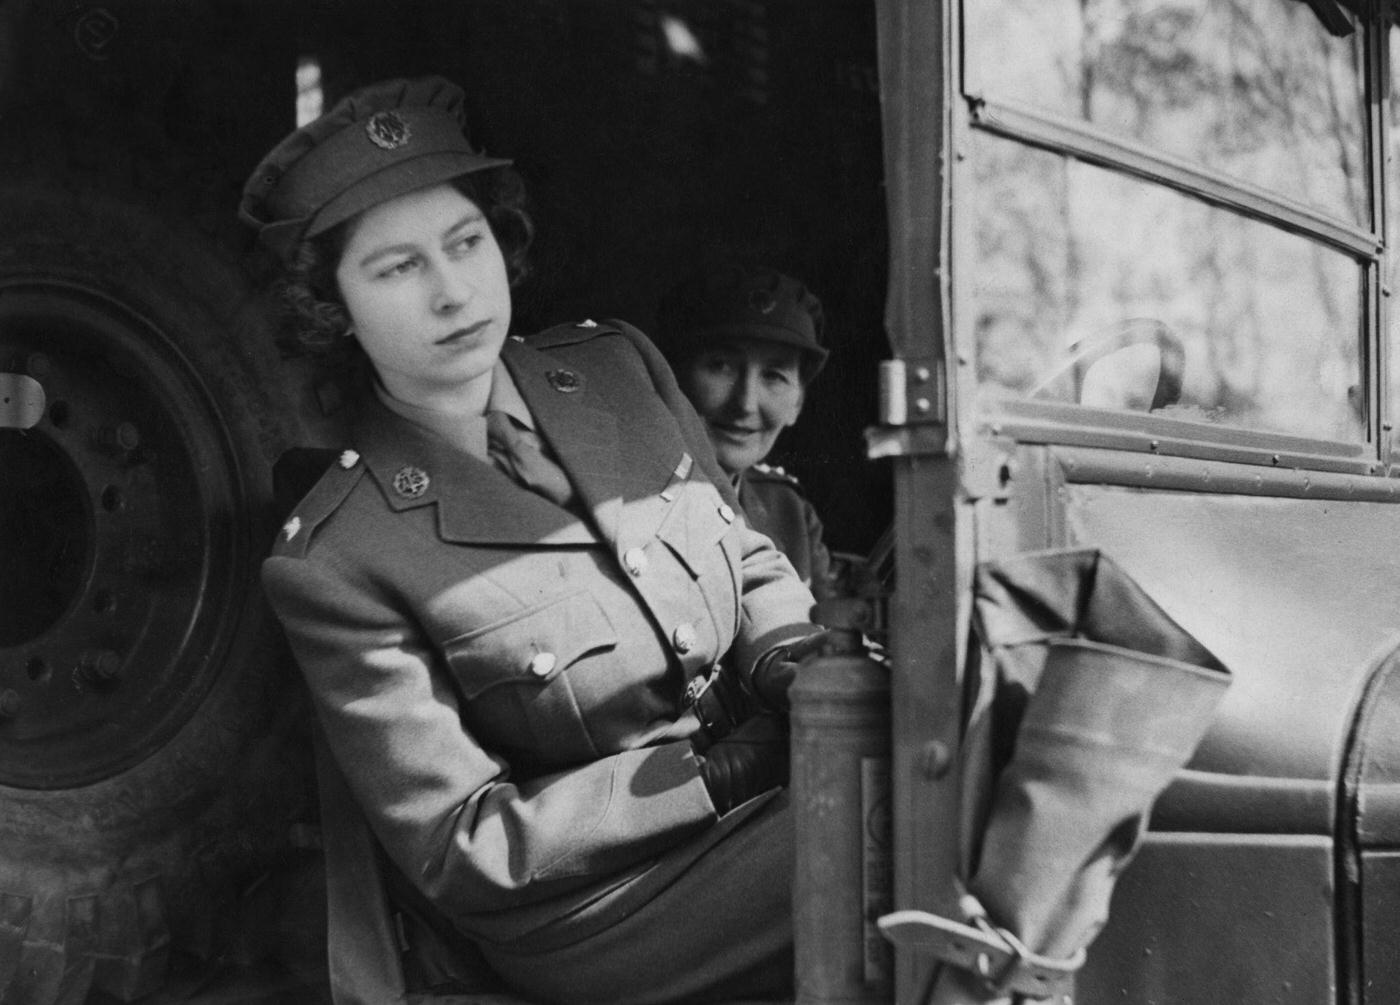 Princess Elizabeth driving an ambulance during her wartime service in the A.T.S. (Auxiliary Territorial Service), 1945